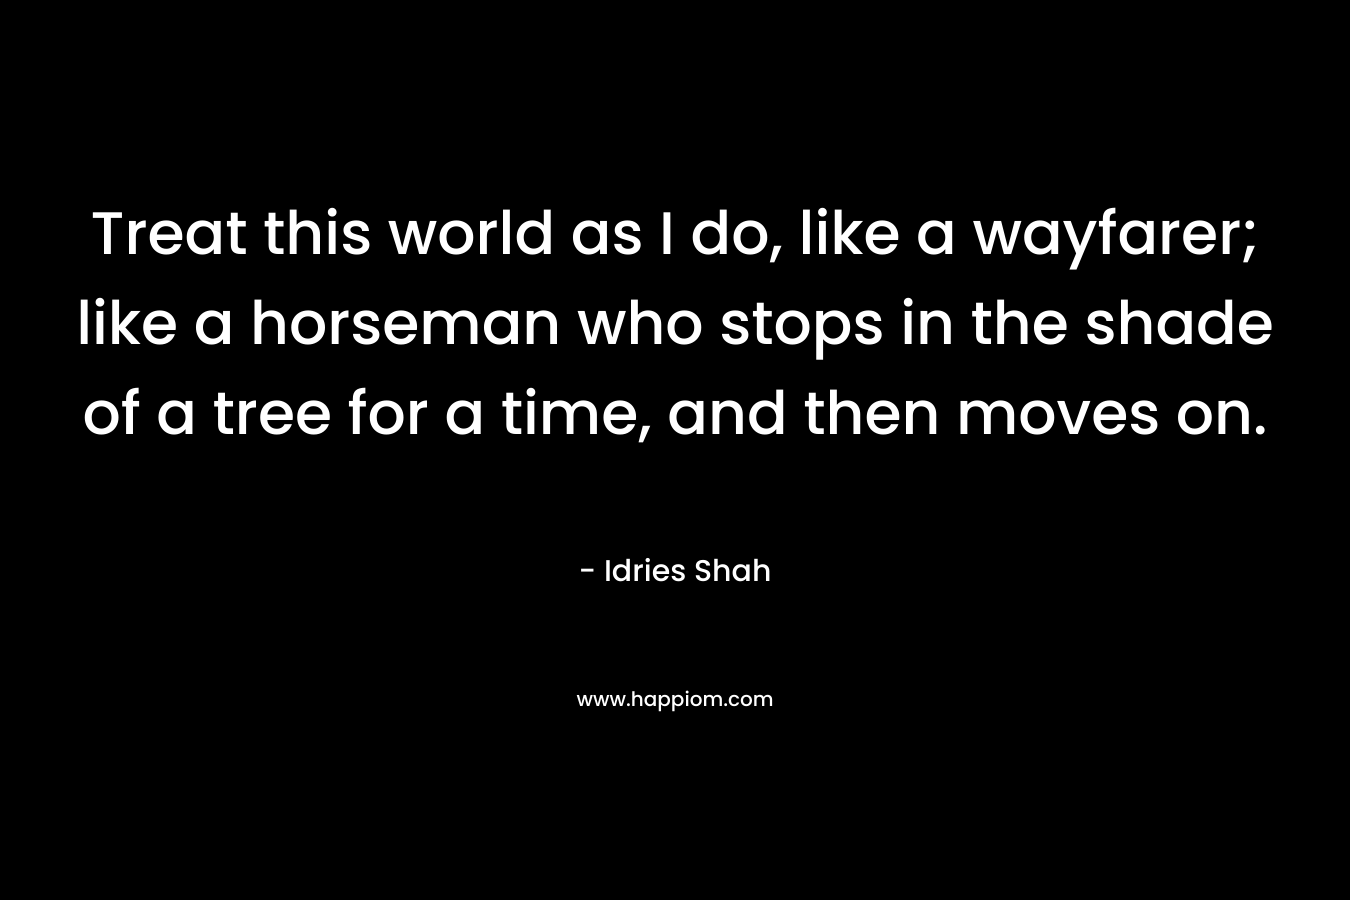 Treat this world as I do, like a wayfarer; like a horseman who stops in the shade of a tree for a time, and then moves on. – Idries Shah